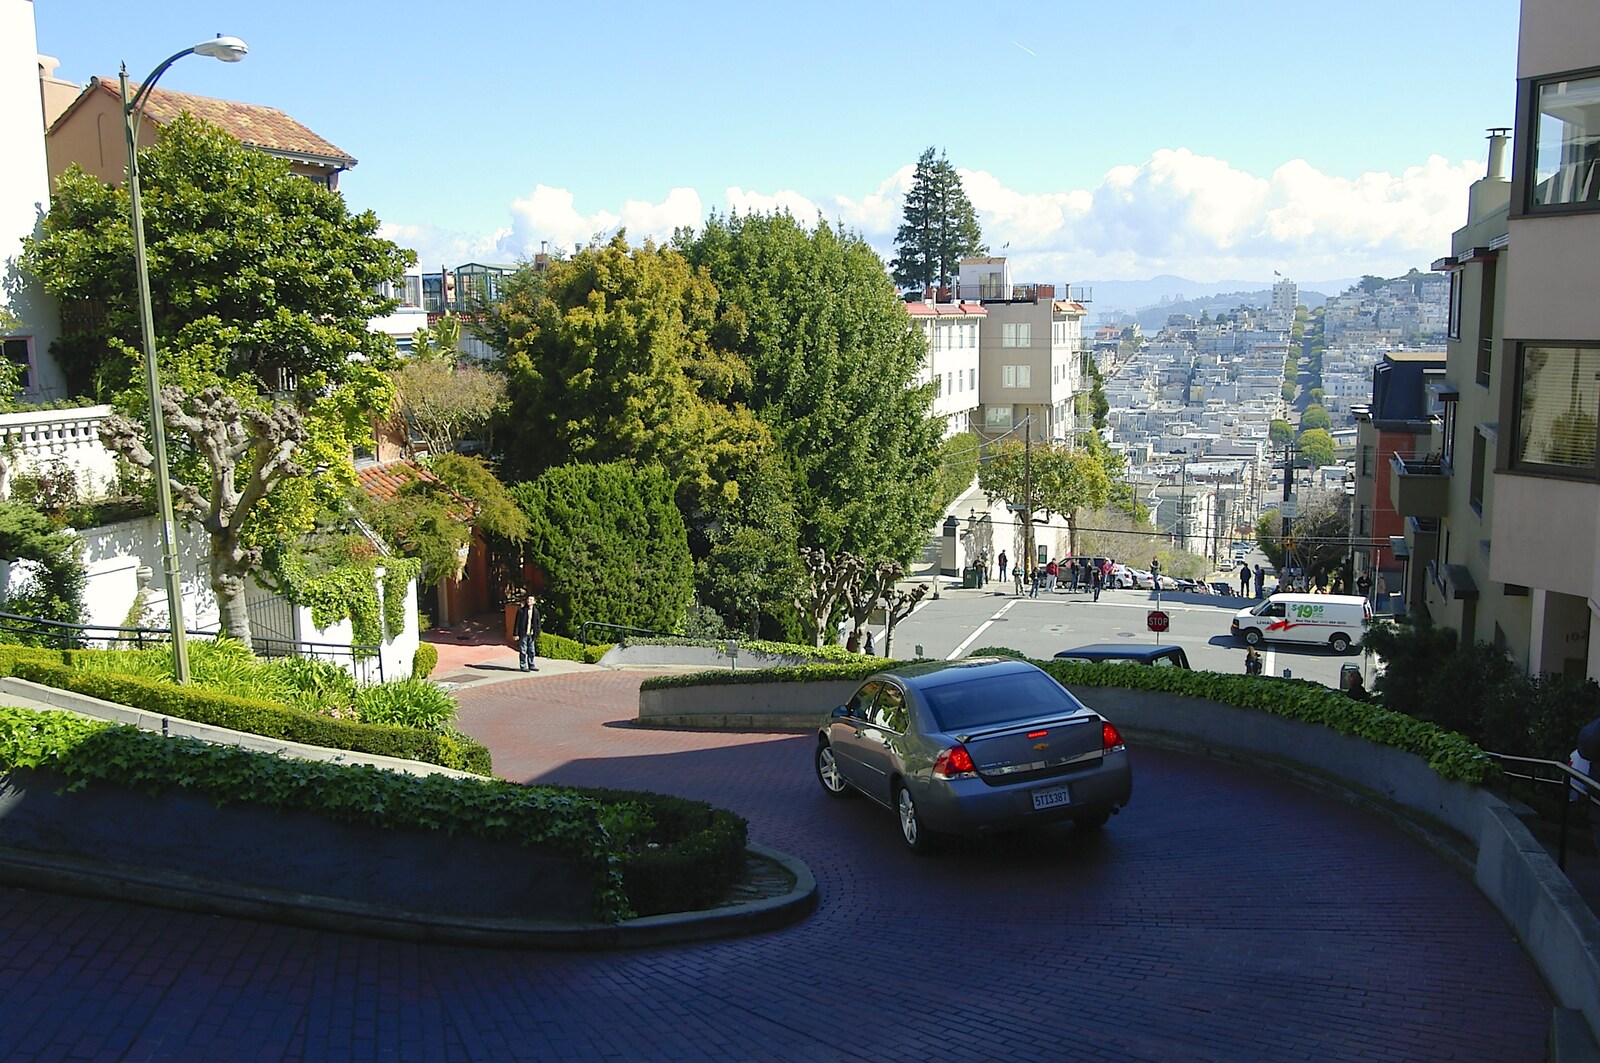 Looking down Lombard Street from Chinatown, Telegraph Hill and Fisherman's Wharf, San Francisco, California, US - 11th March 2006